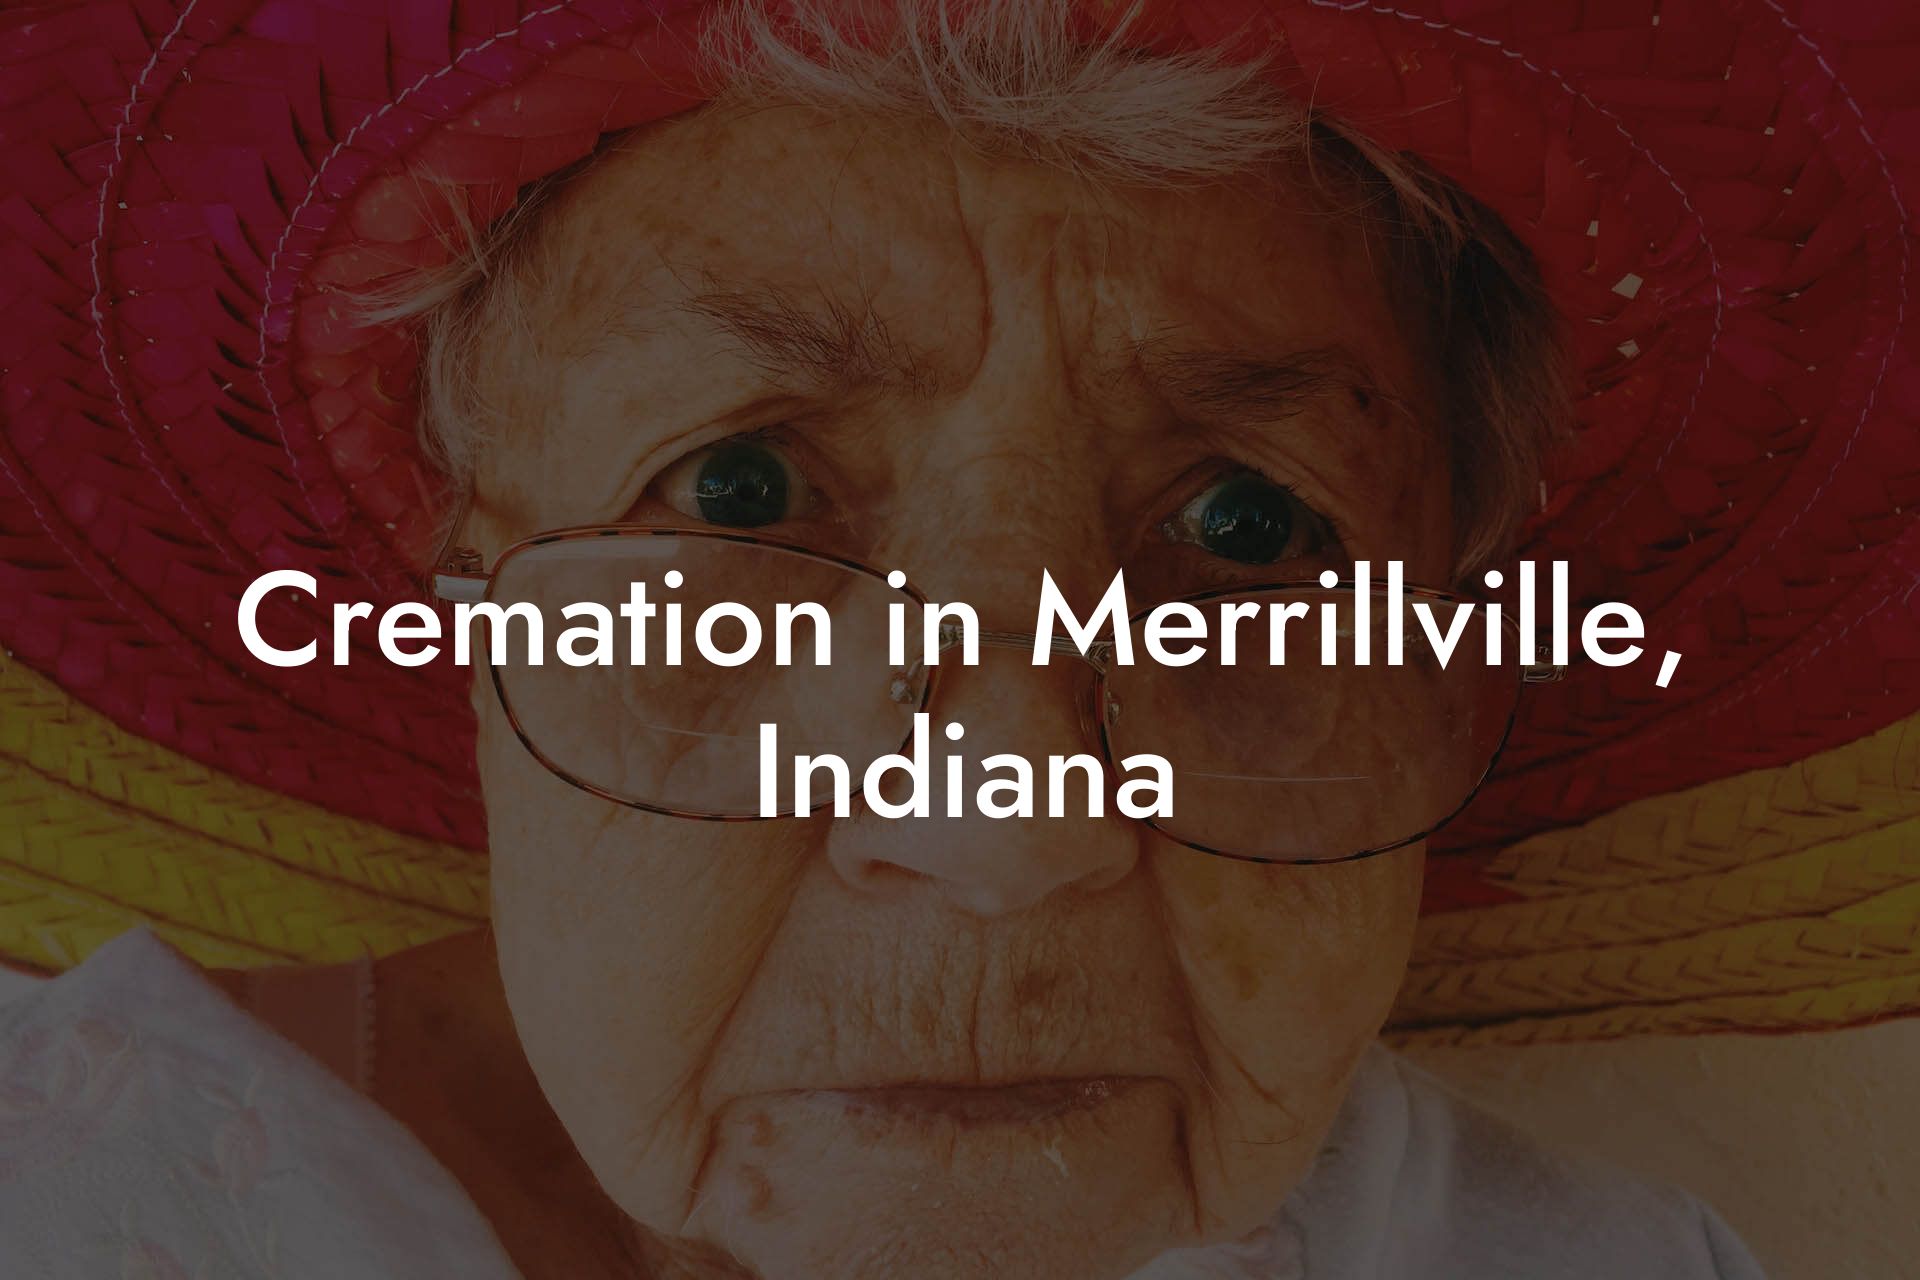 Cremation in Merrillville, Indiana